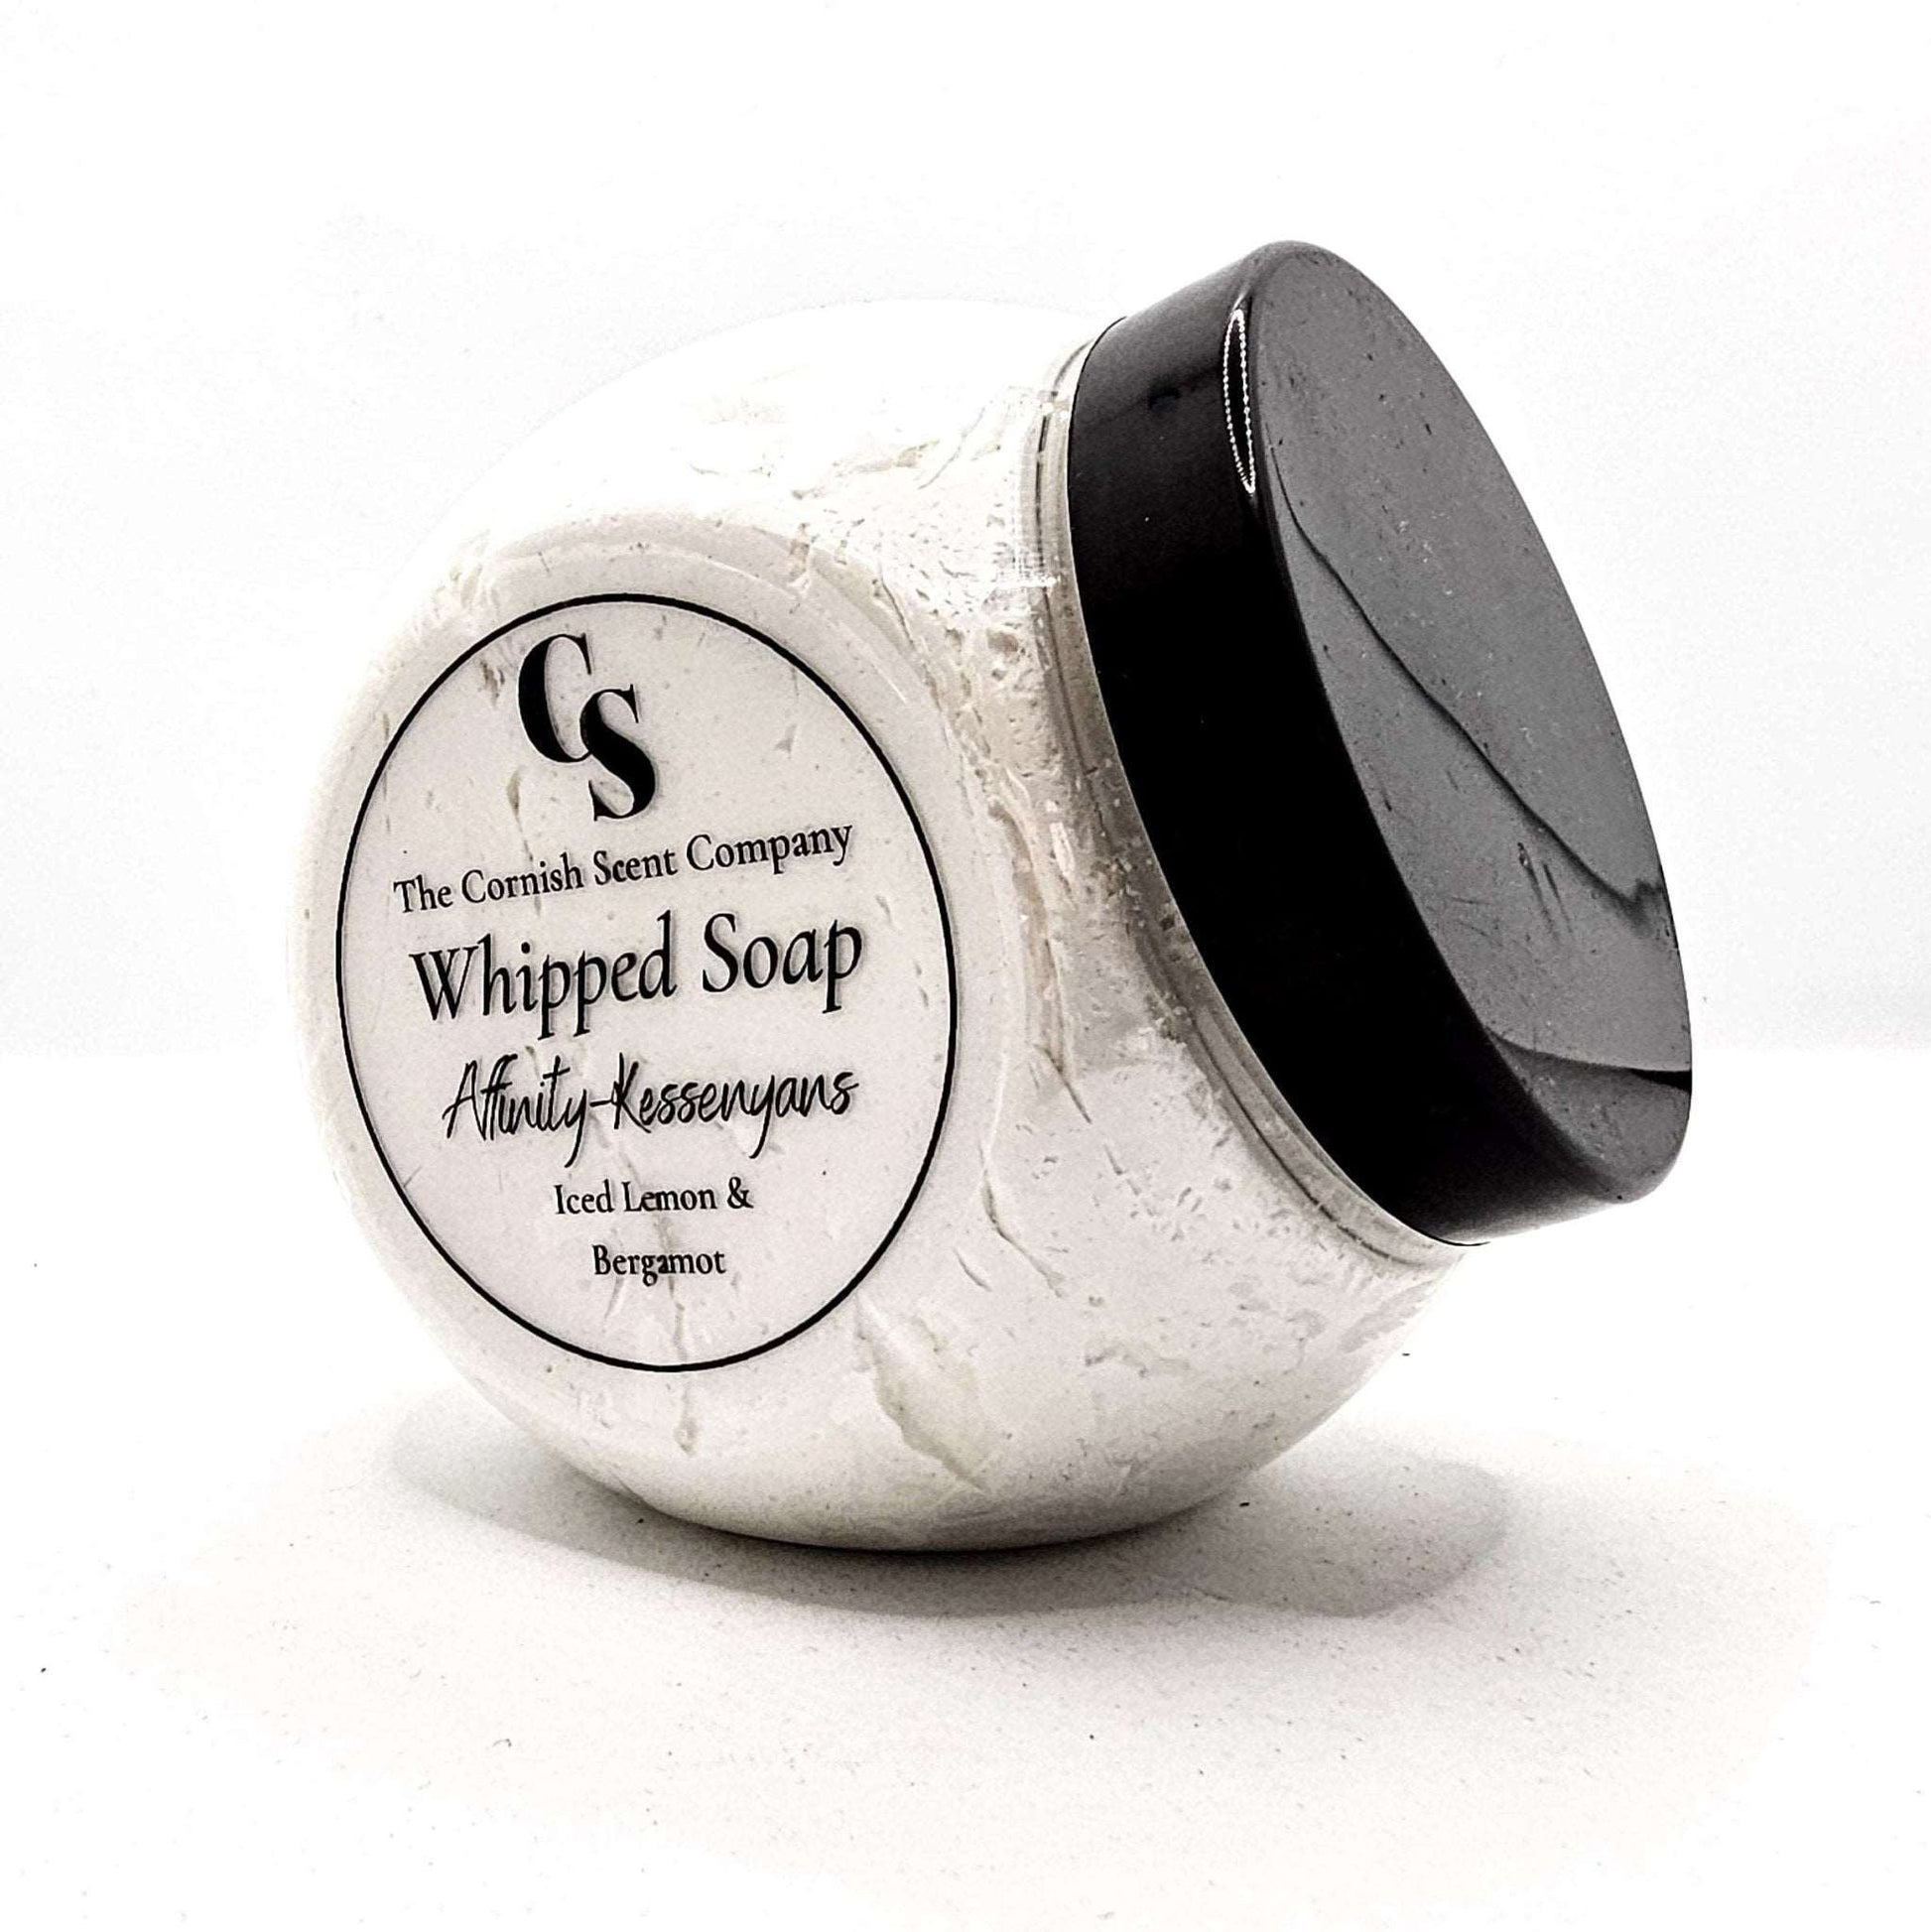 Affinity Whipped soap / bath mouse - The Cornish Scent Company